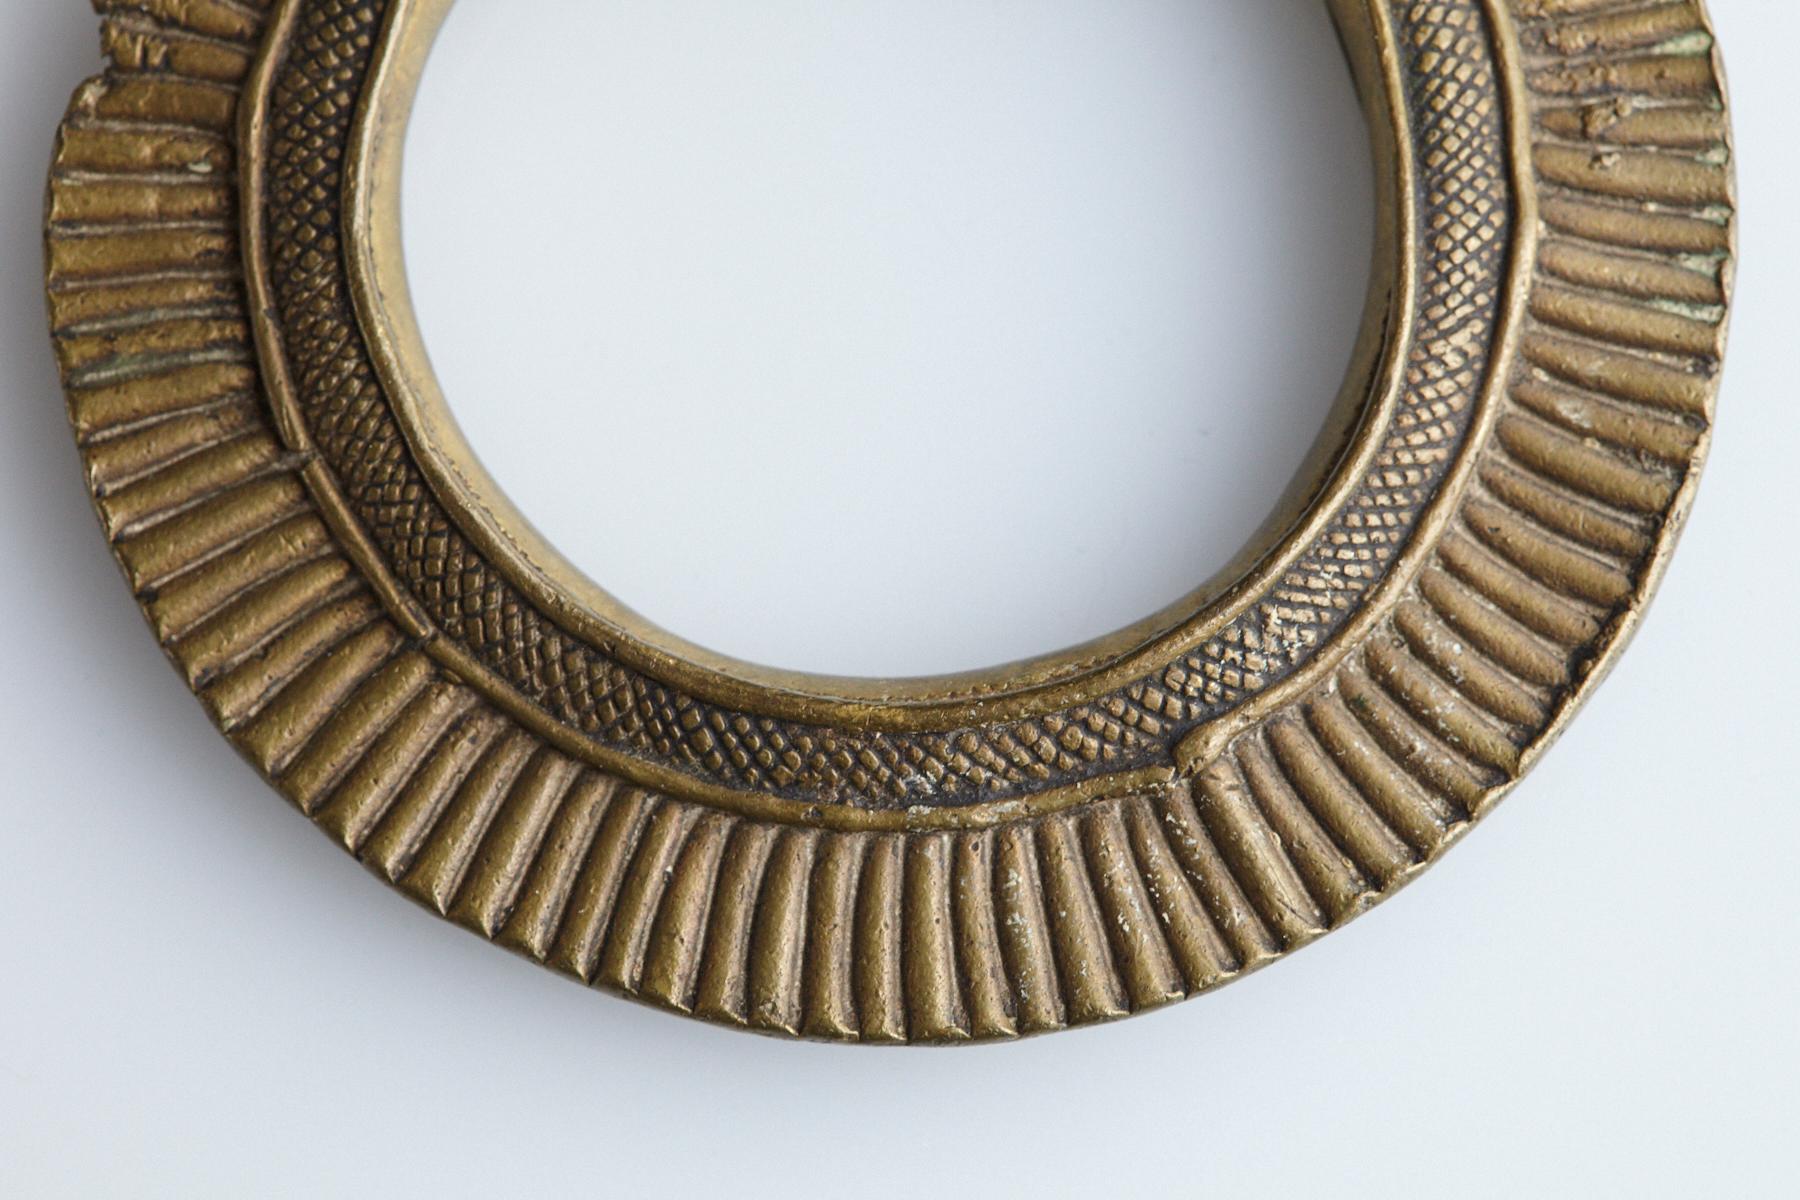 Early to mid-19th-century bronze currency bracelet / Manilla in circle form. Intricate graphical geometrical. This type of bracelet was worn/used by the Zaghawa People also called Béri People, an ethnic group primarily residing in southwestern